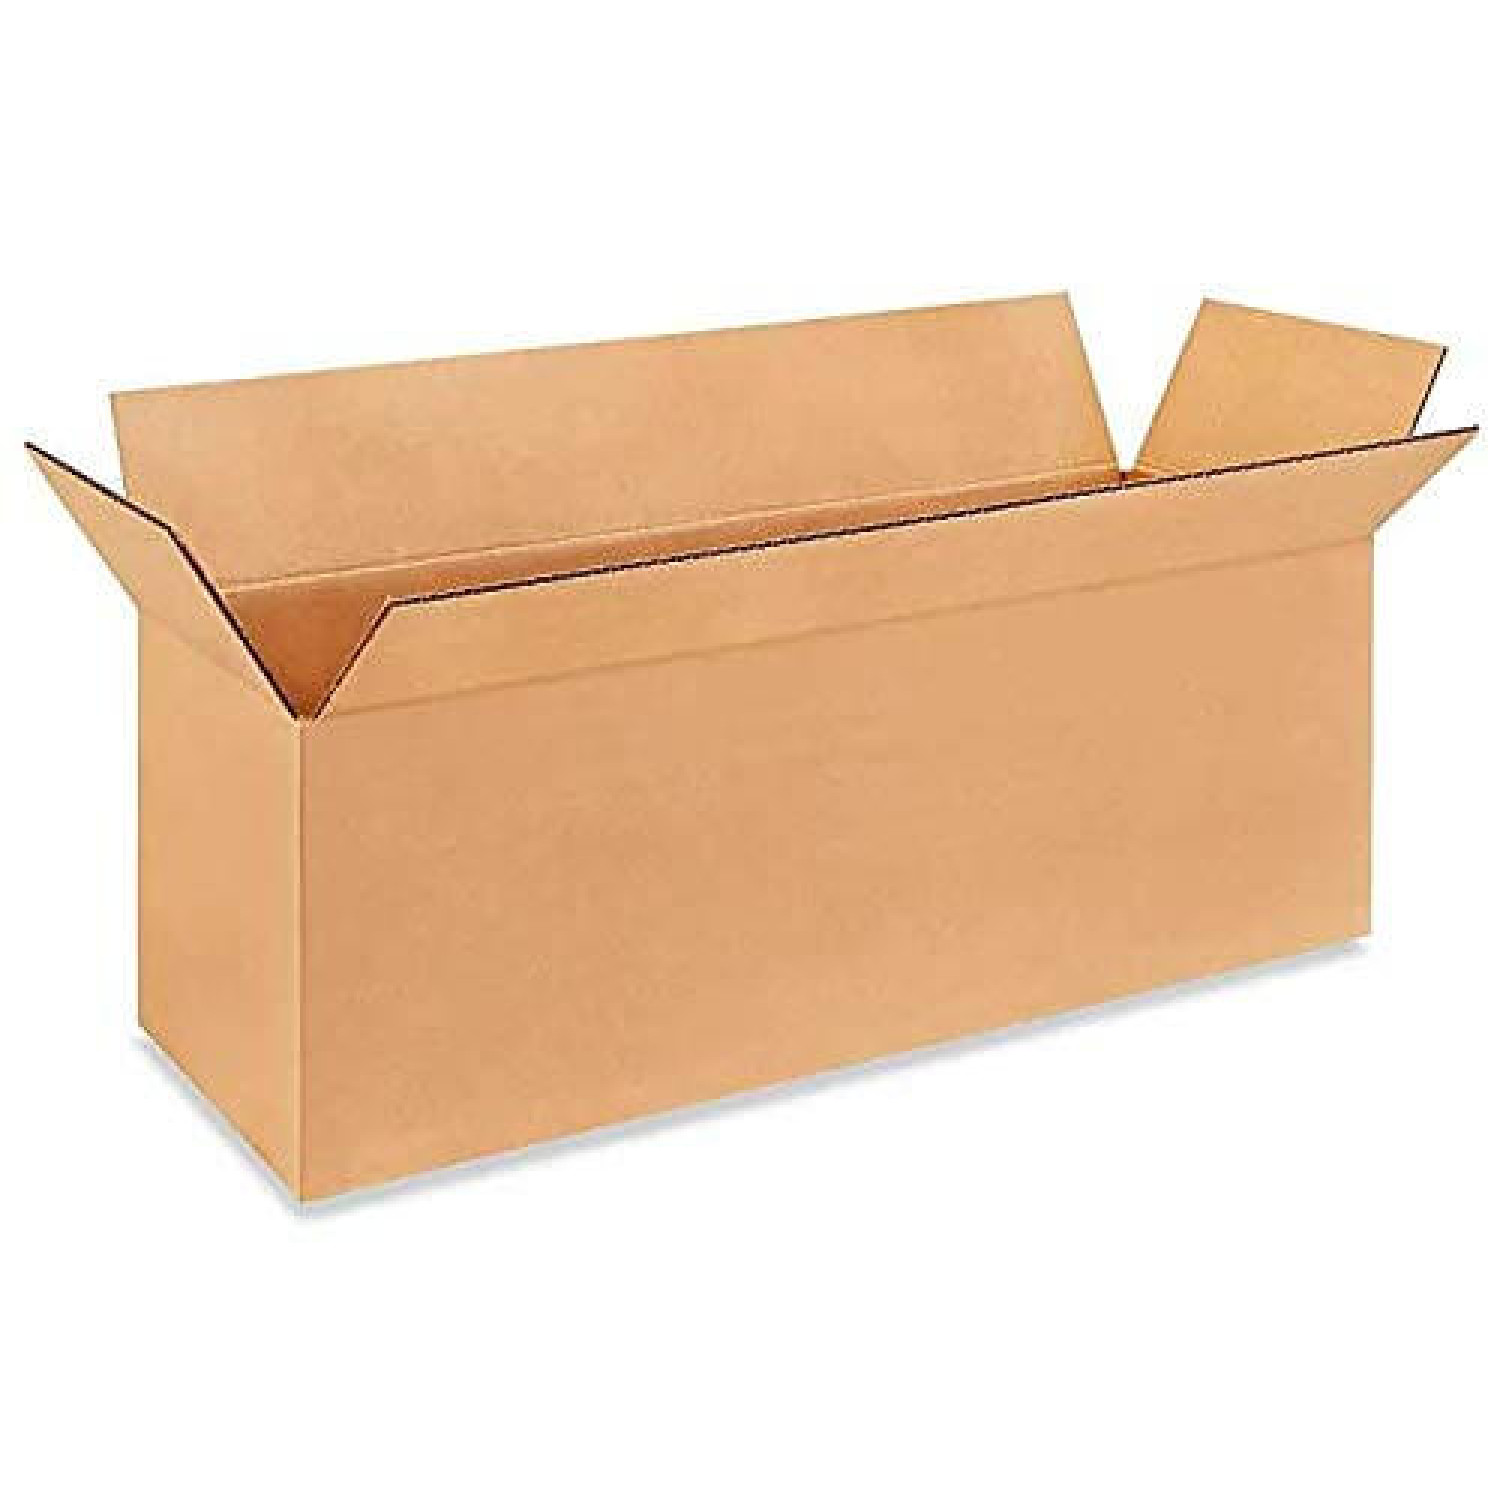 Large Cardboard Sheets 24L X 18W, 50-Pack, Corrugated Thin Sheets for  Shippin